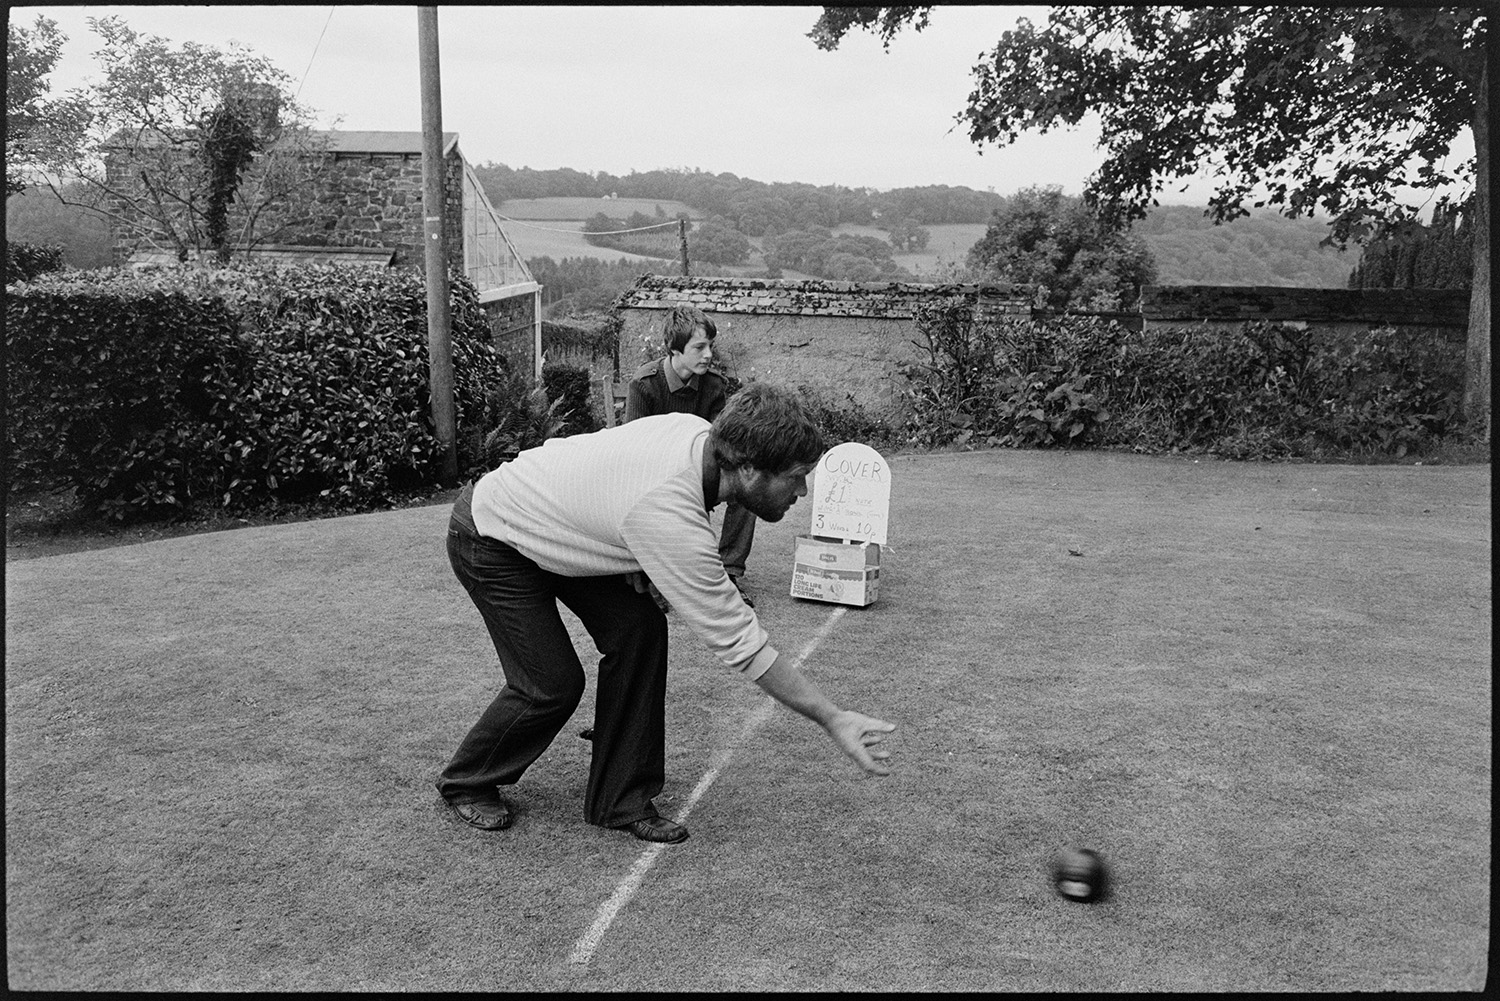 Swimming and sports at fete.
[Man playing boules during a fete at Merton Rectory.]